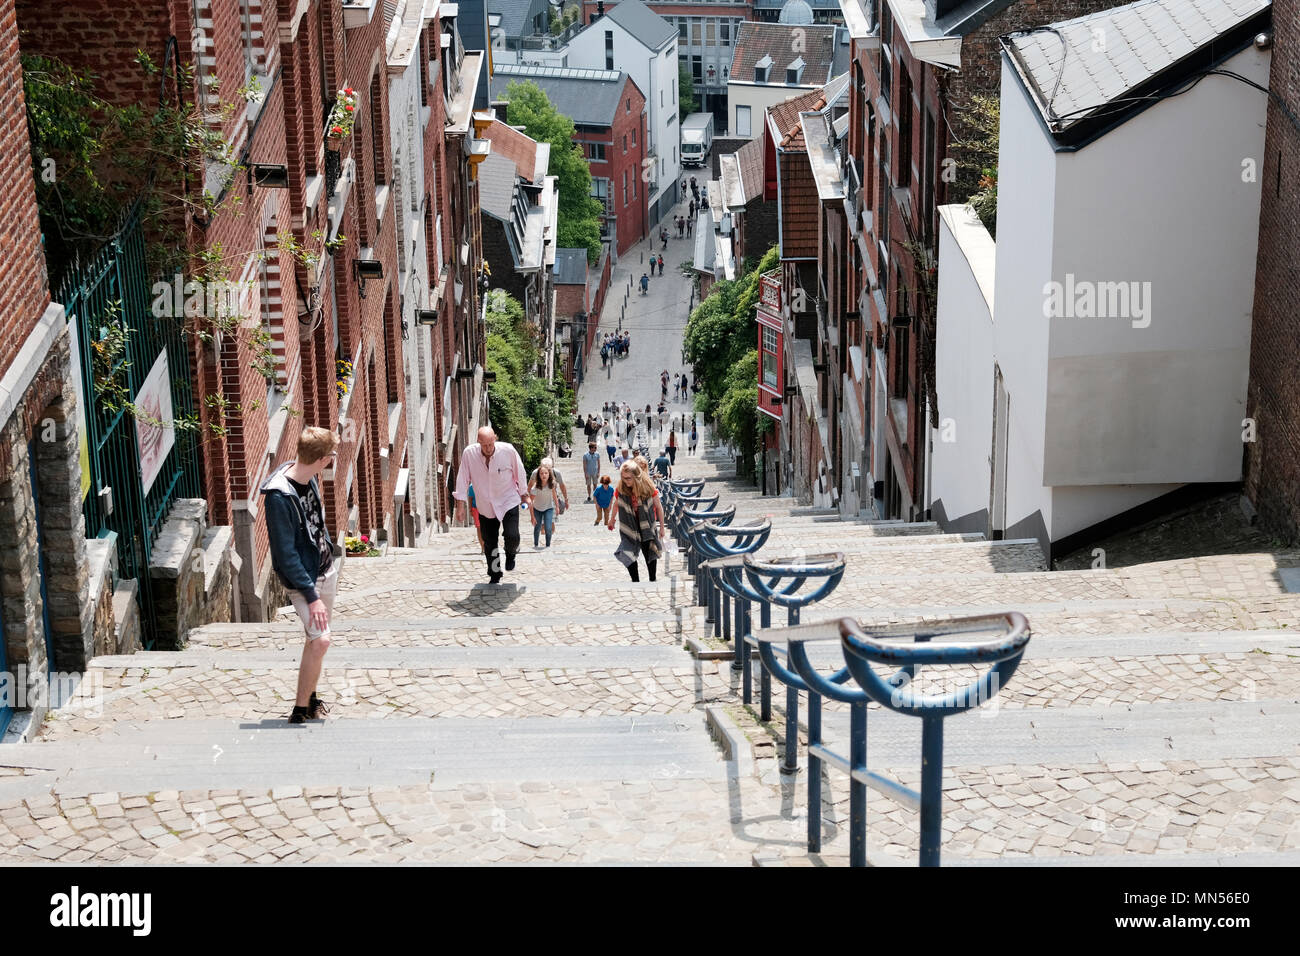 Montagne de Bueren, Liege, Belgium. The steep 374-step staircase has gained notoriety on the internet and is a symbol of the Belgian city. Stock Photo